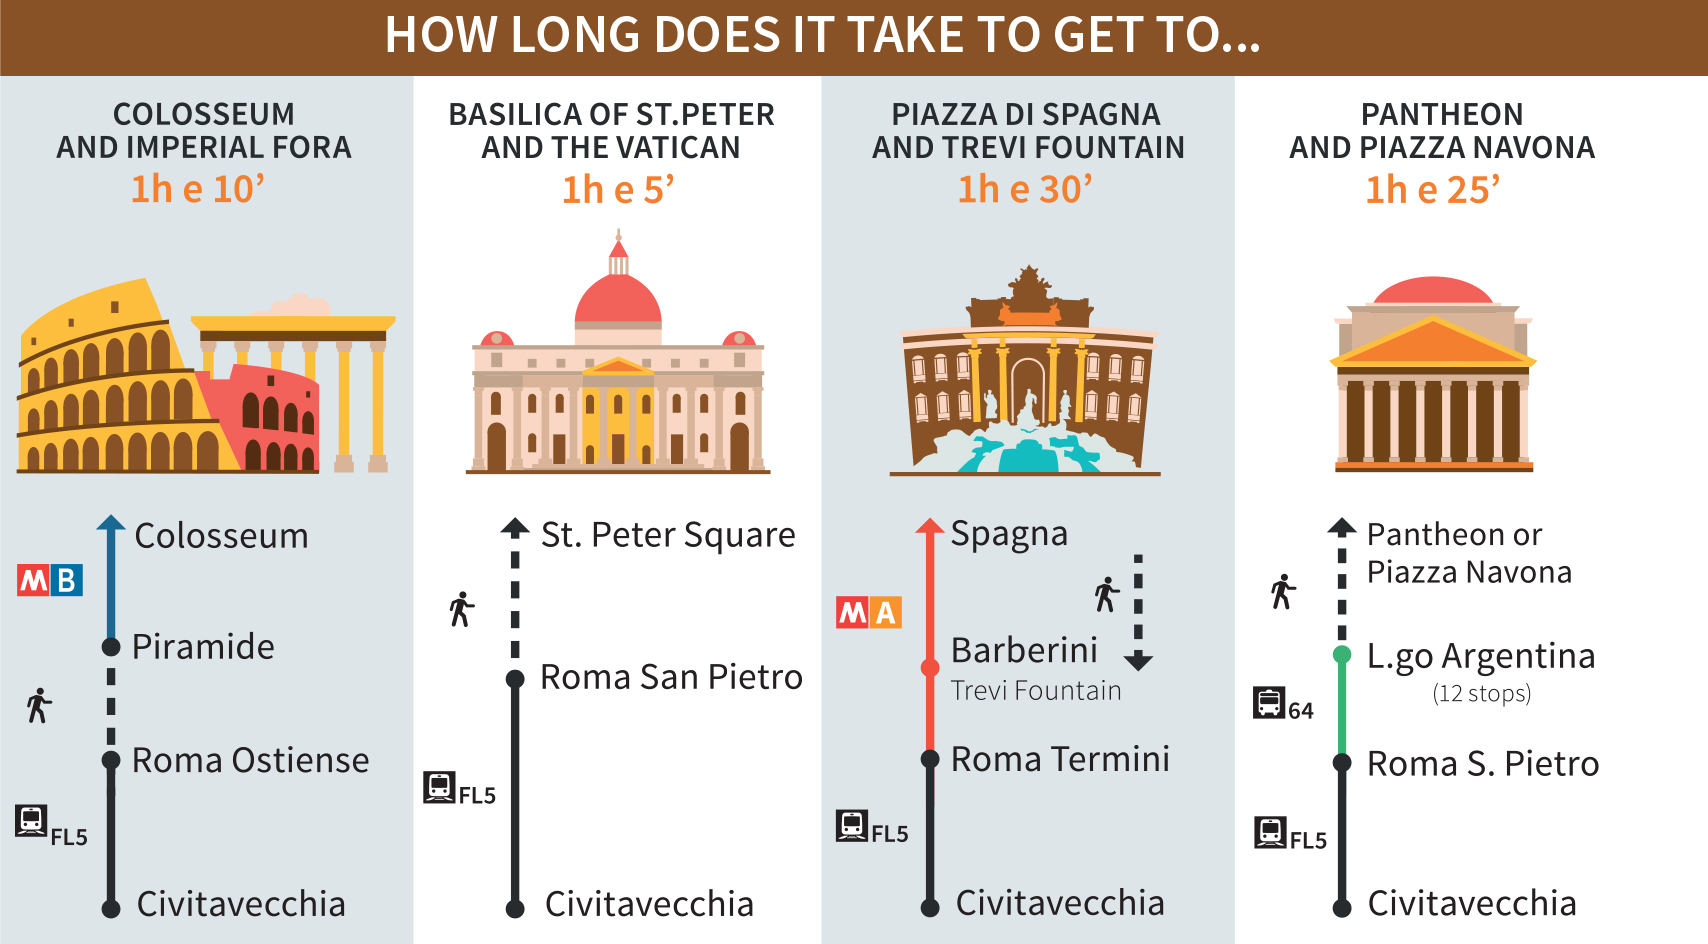 Cruise Passenger's Guide: how long does it take to get to the Colosseum, Imperial Fora, Saint Peter's Basilica, Piazza di Spagna, Trevi Fountain, Pantheon and Piazza Navona